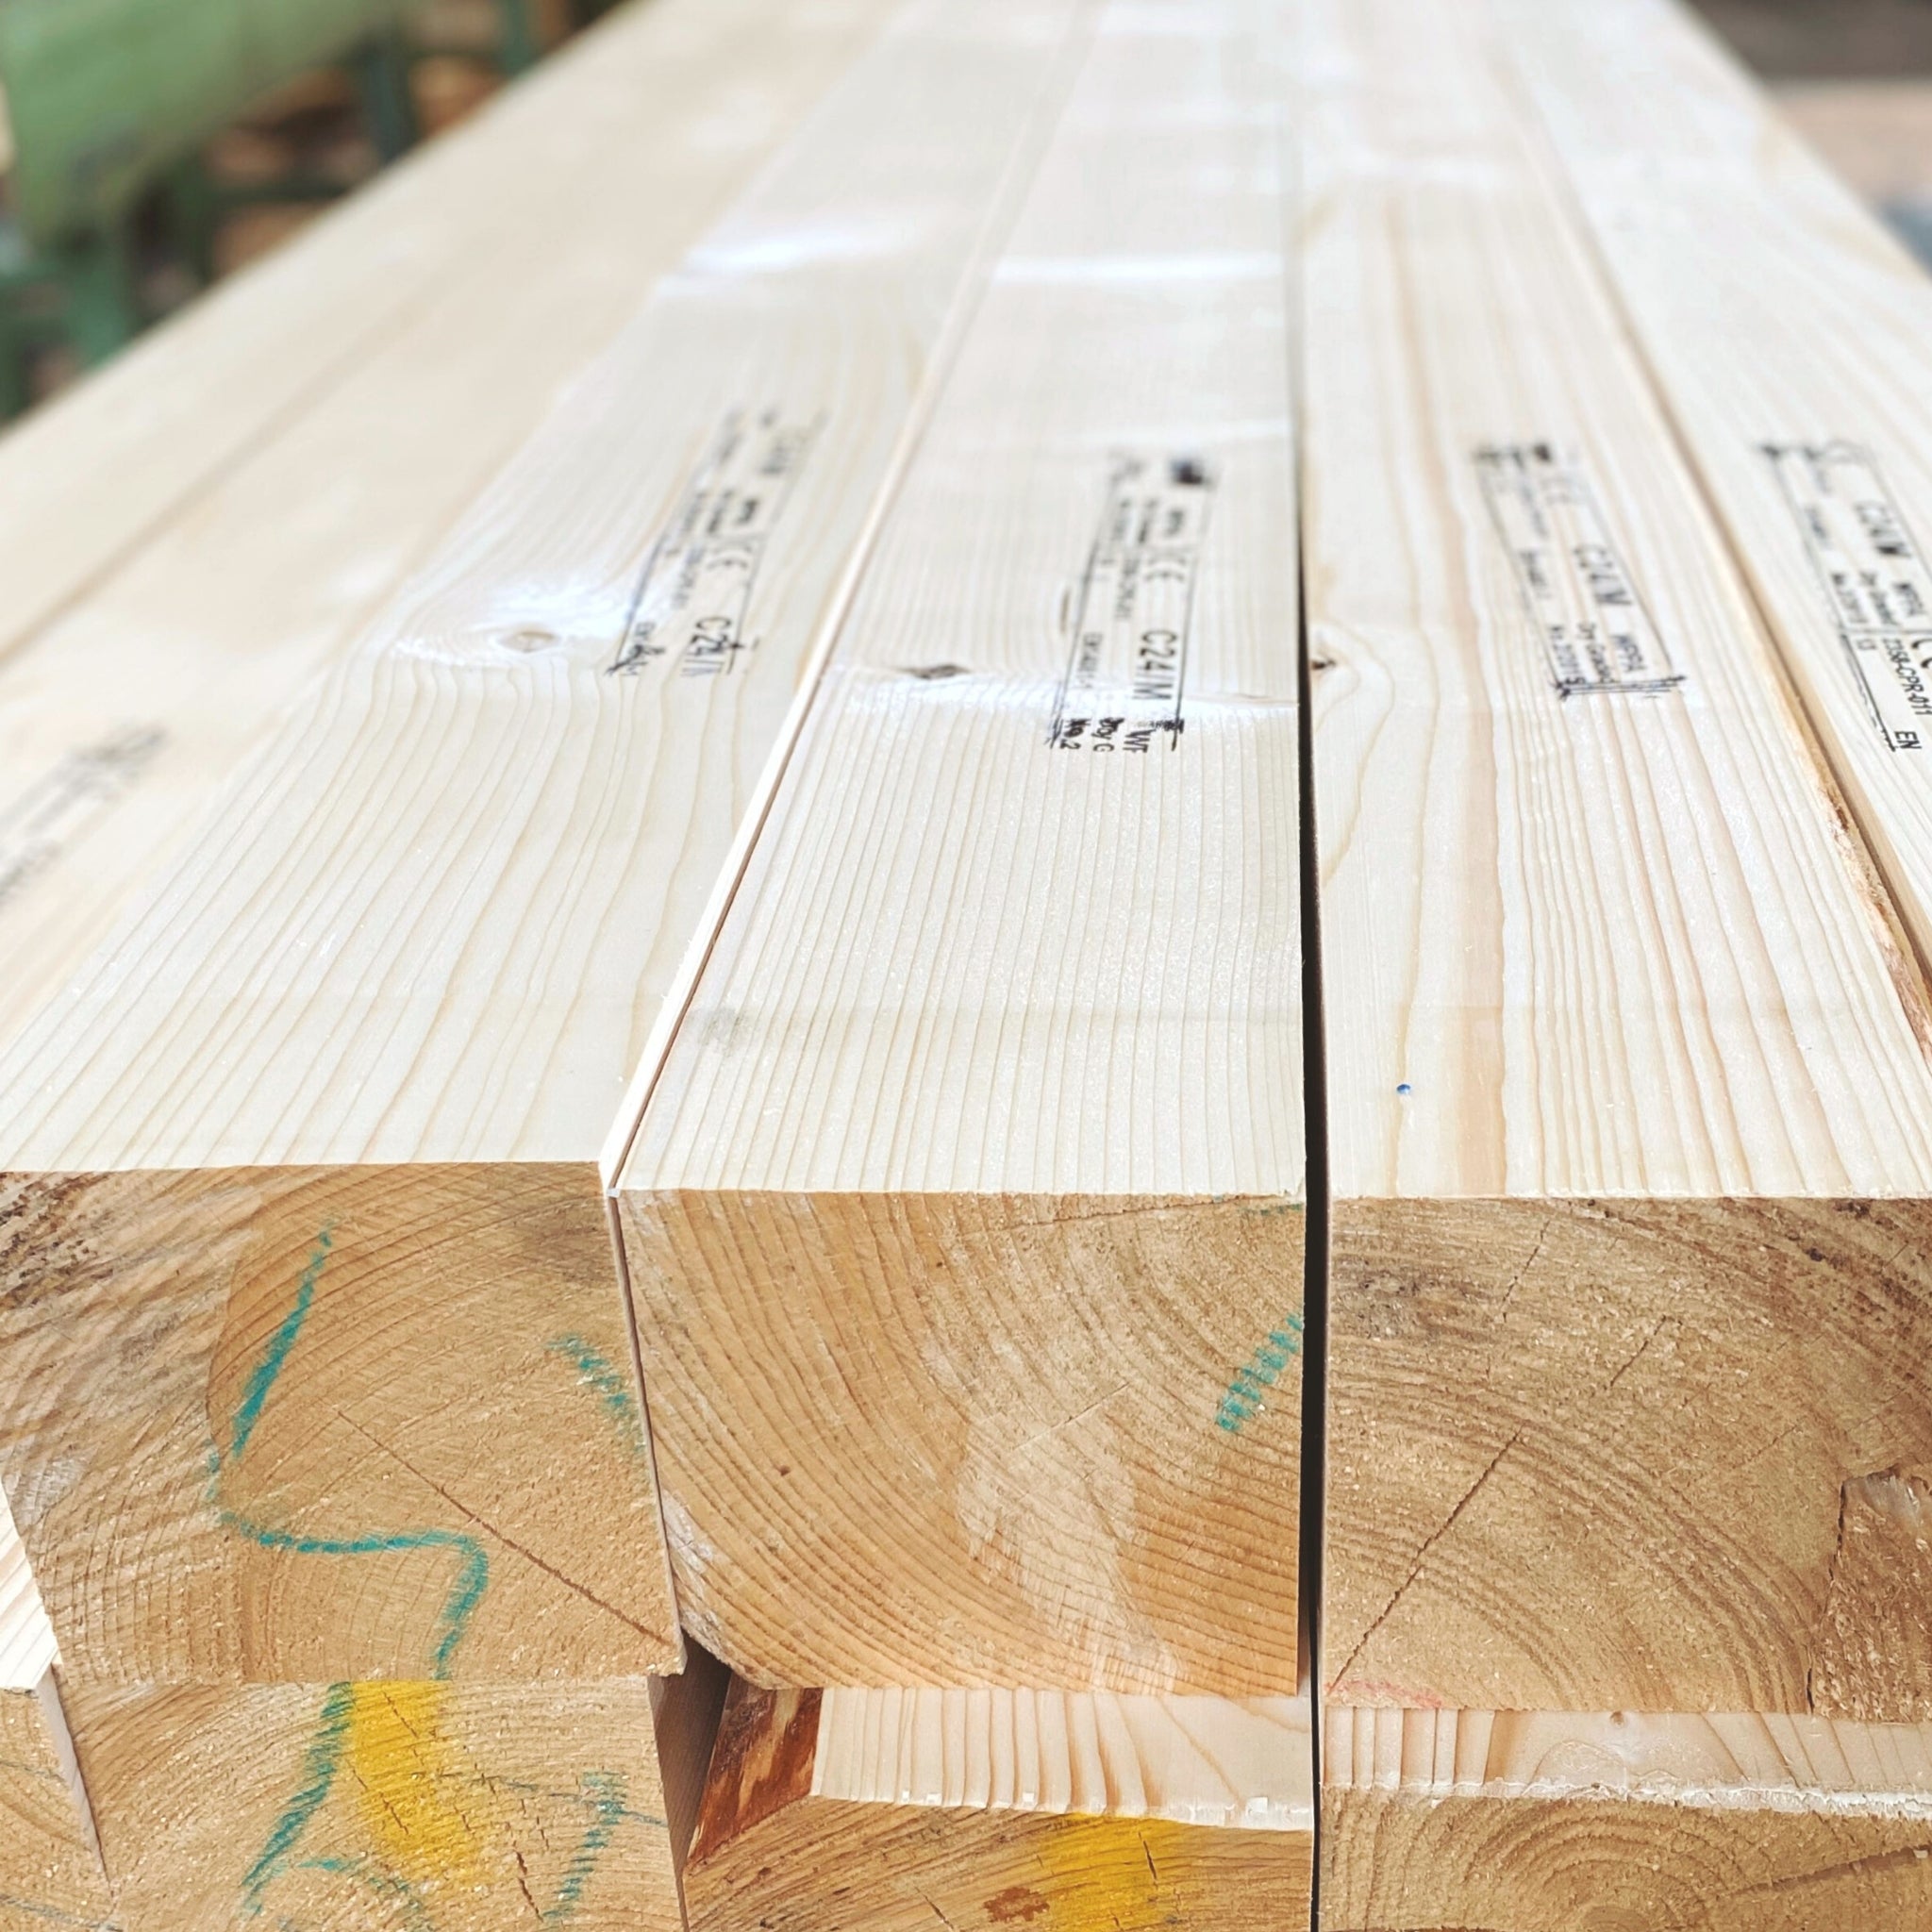 Thickness 95mm - Planed Spruce